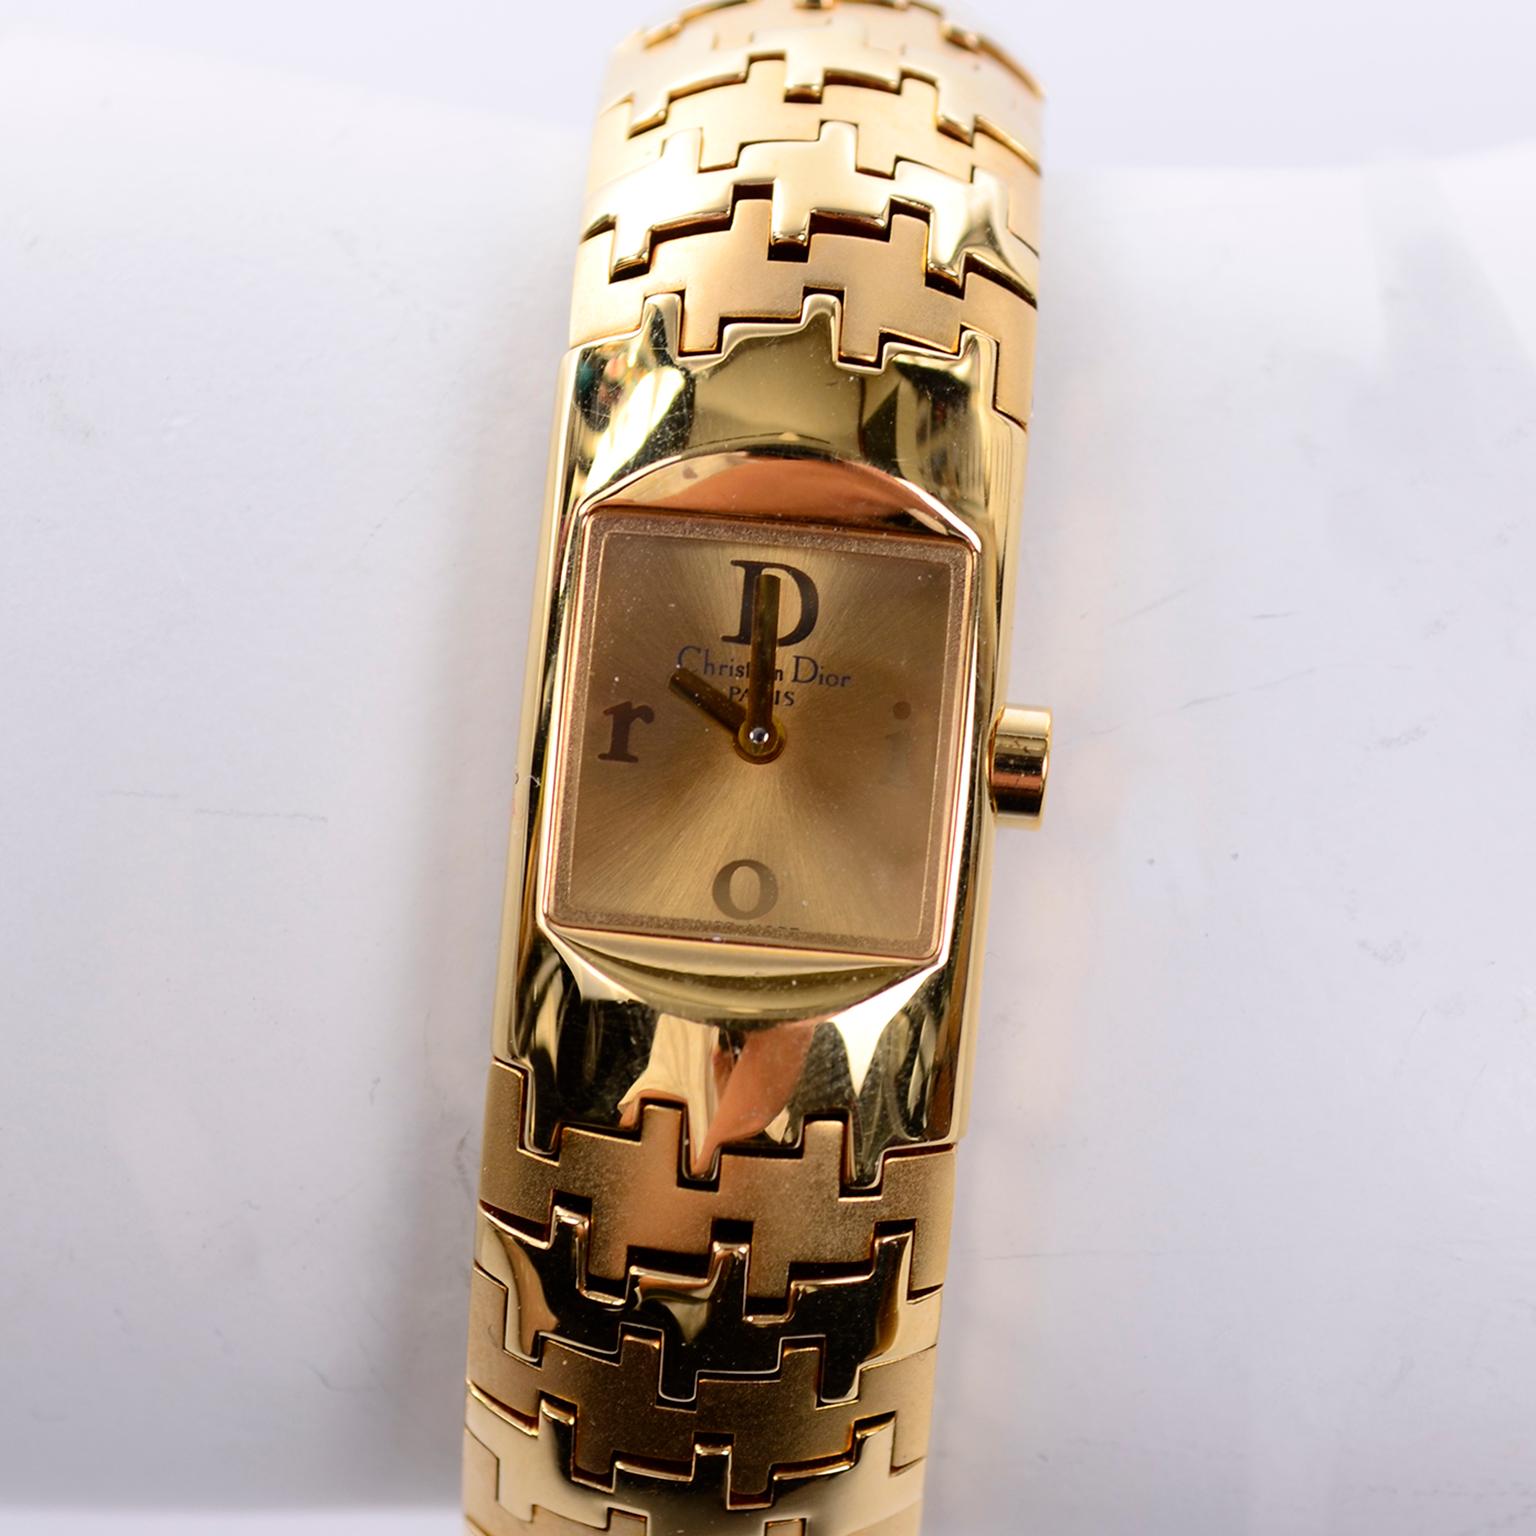 Christian Dior Diorific Houndstooth Gold Plated Ladies Bracelet Watch Never Used 4